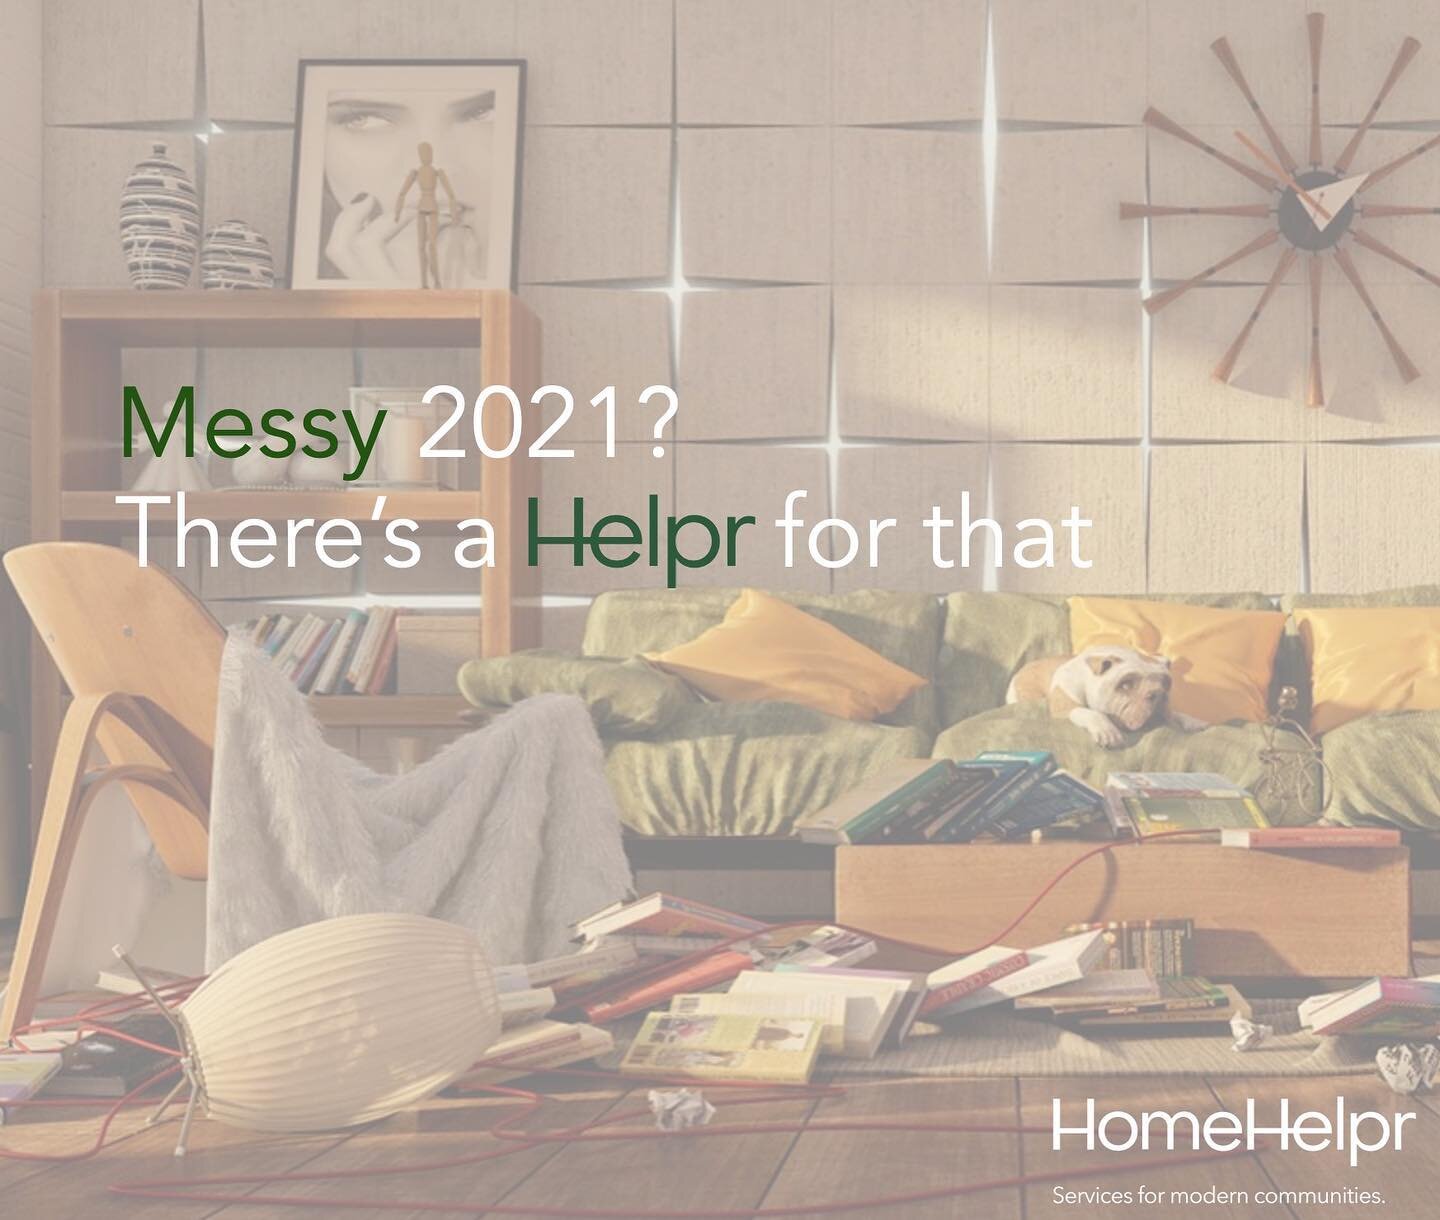 We get it, 2021 was pretty rough. Luckily, we have Helprs that can deal with the mess so you can stay focused on making 2022 way better. #cleaningservices #mobileservices #HomeHelpr